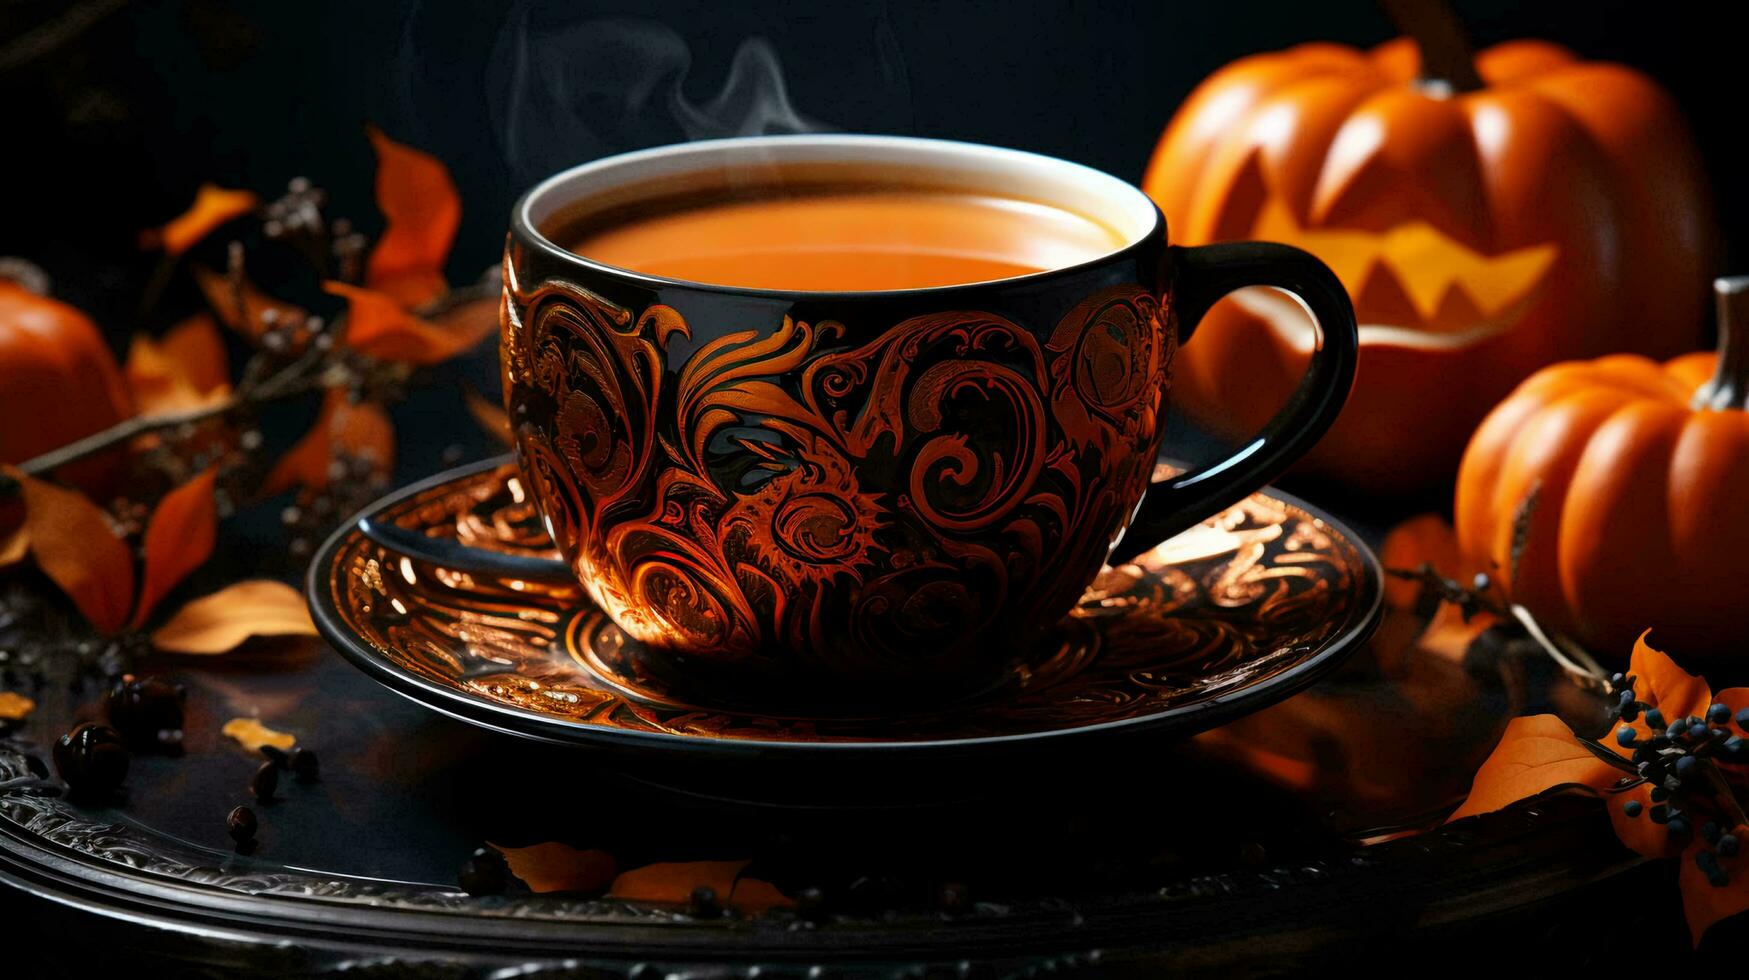 A mug of hot coffee or tea with pumpkins with scary faces for Halloween photo